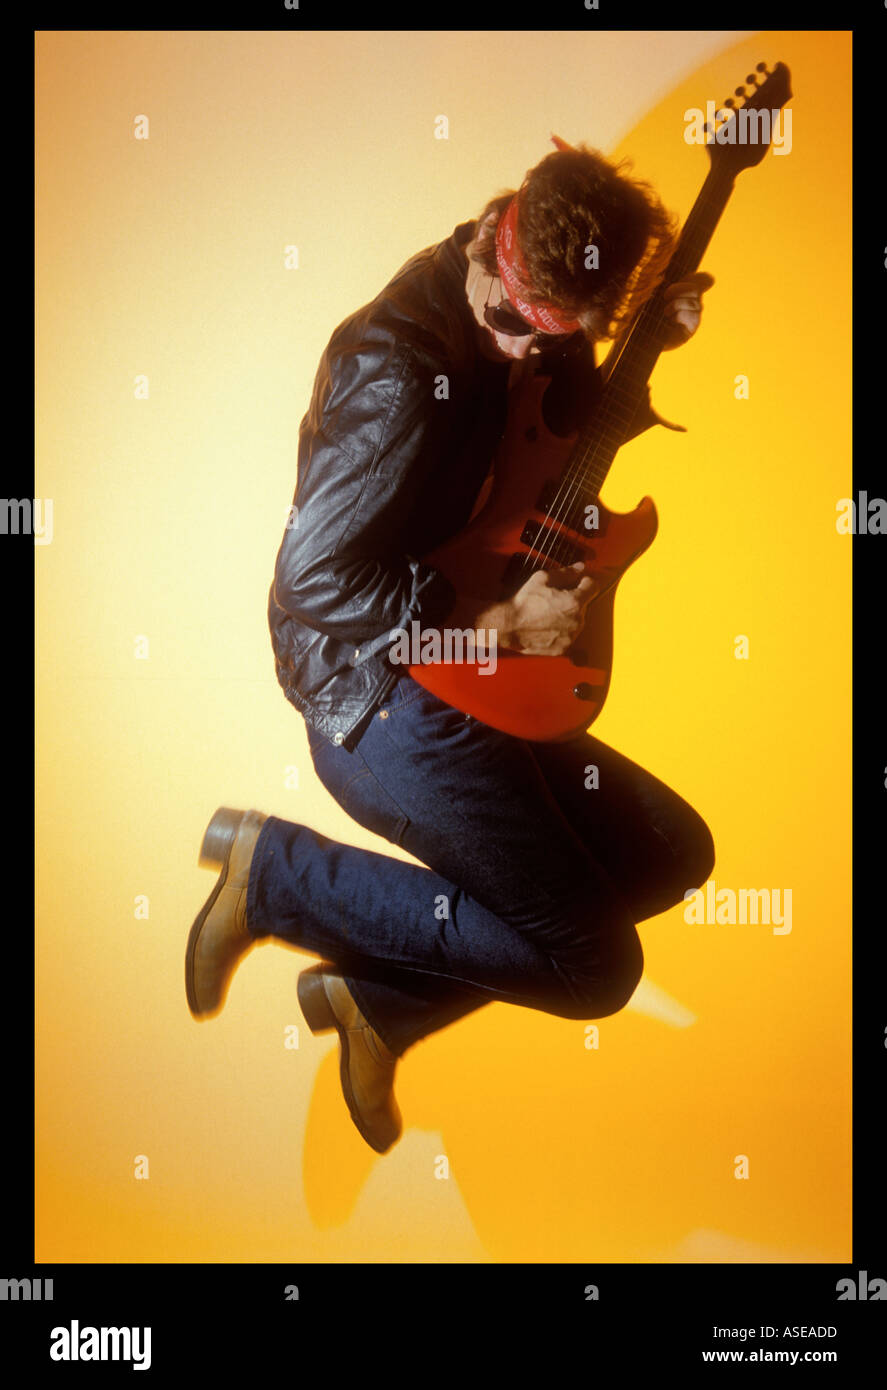 rock and roll musician leaps into the air and belts out a riff on an electric guitar Stock Photo